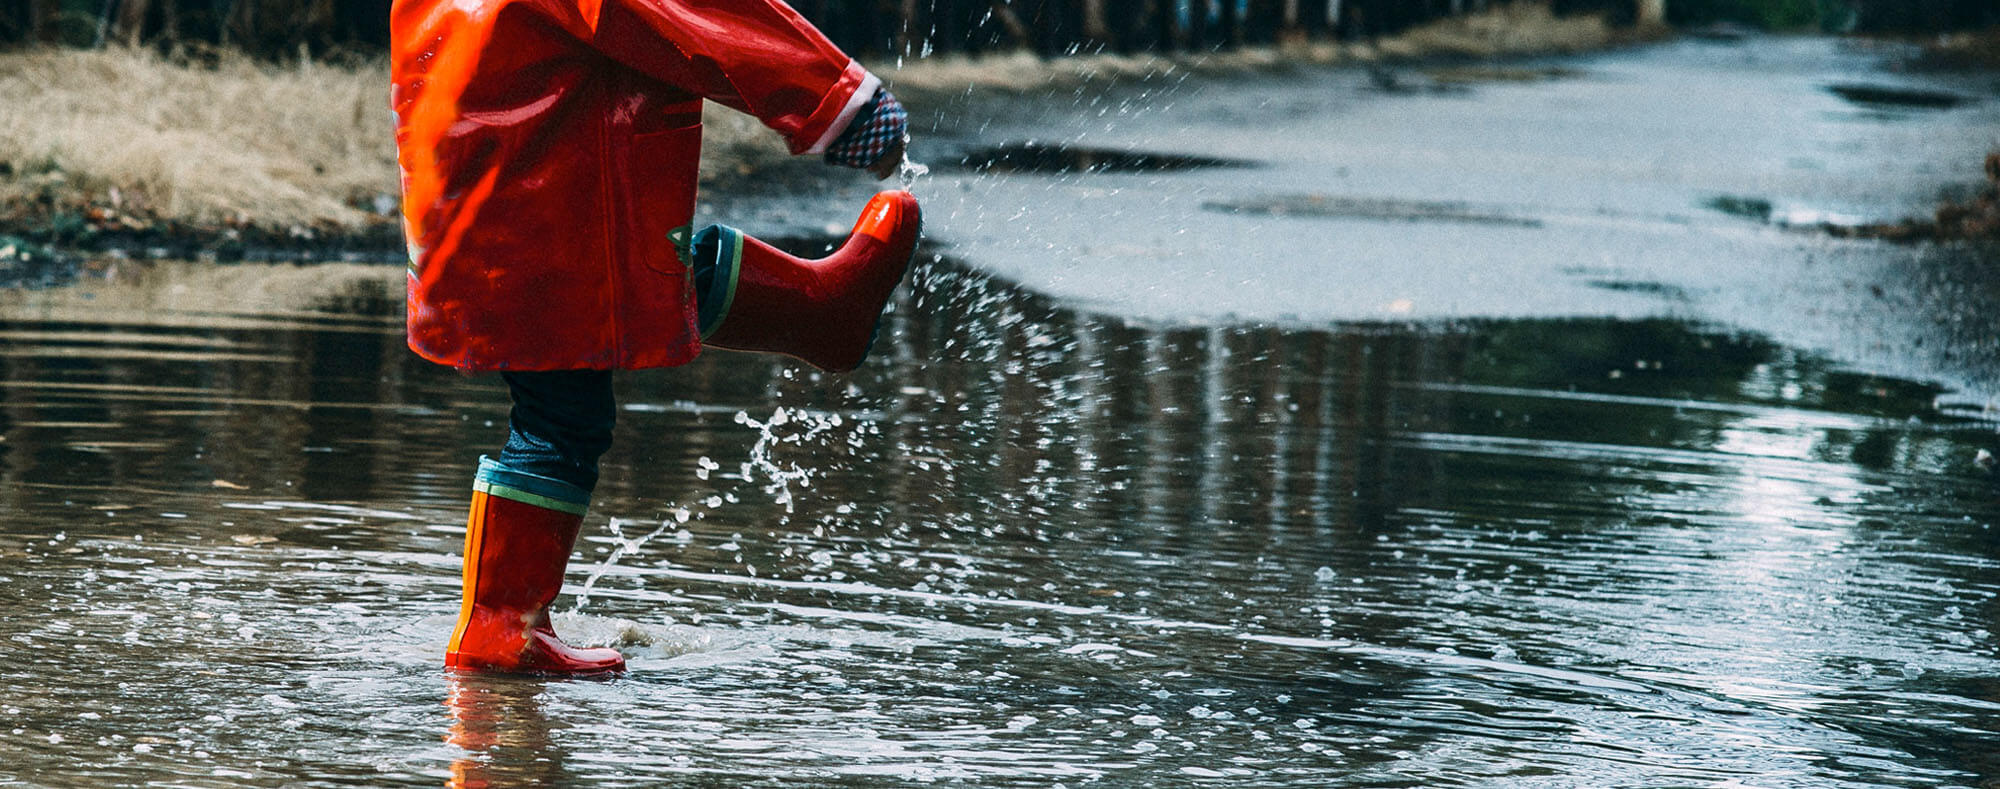 Child with welly boots playing in puddles